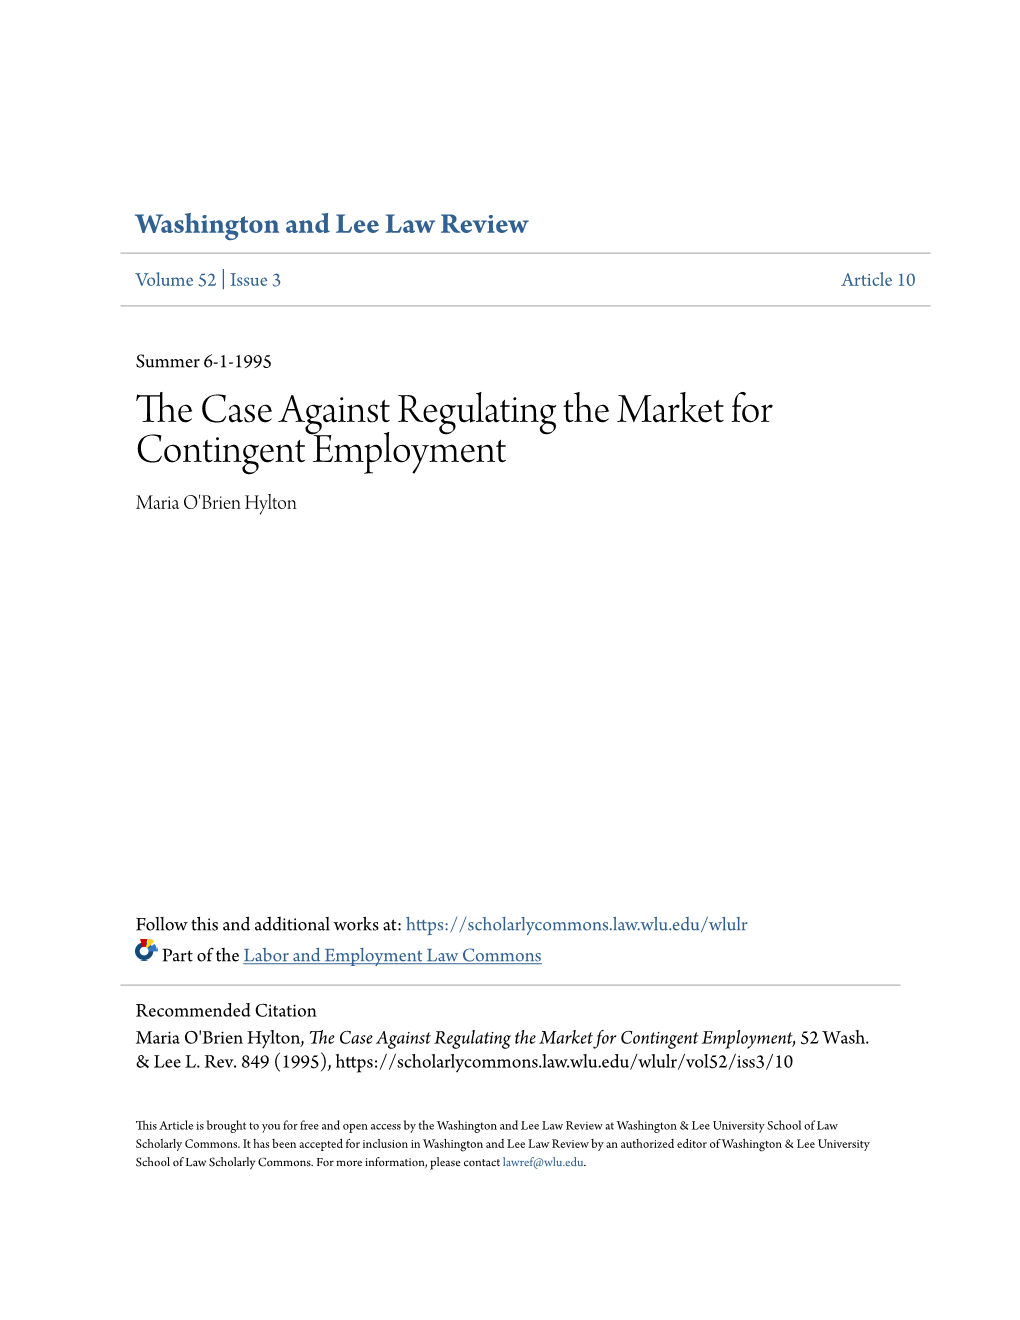 The Case Against Regulating the Market for Contingent Employment, 52 Wash